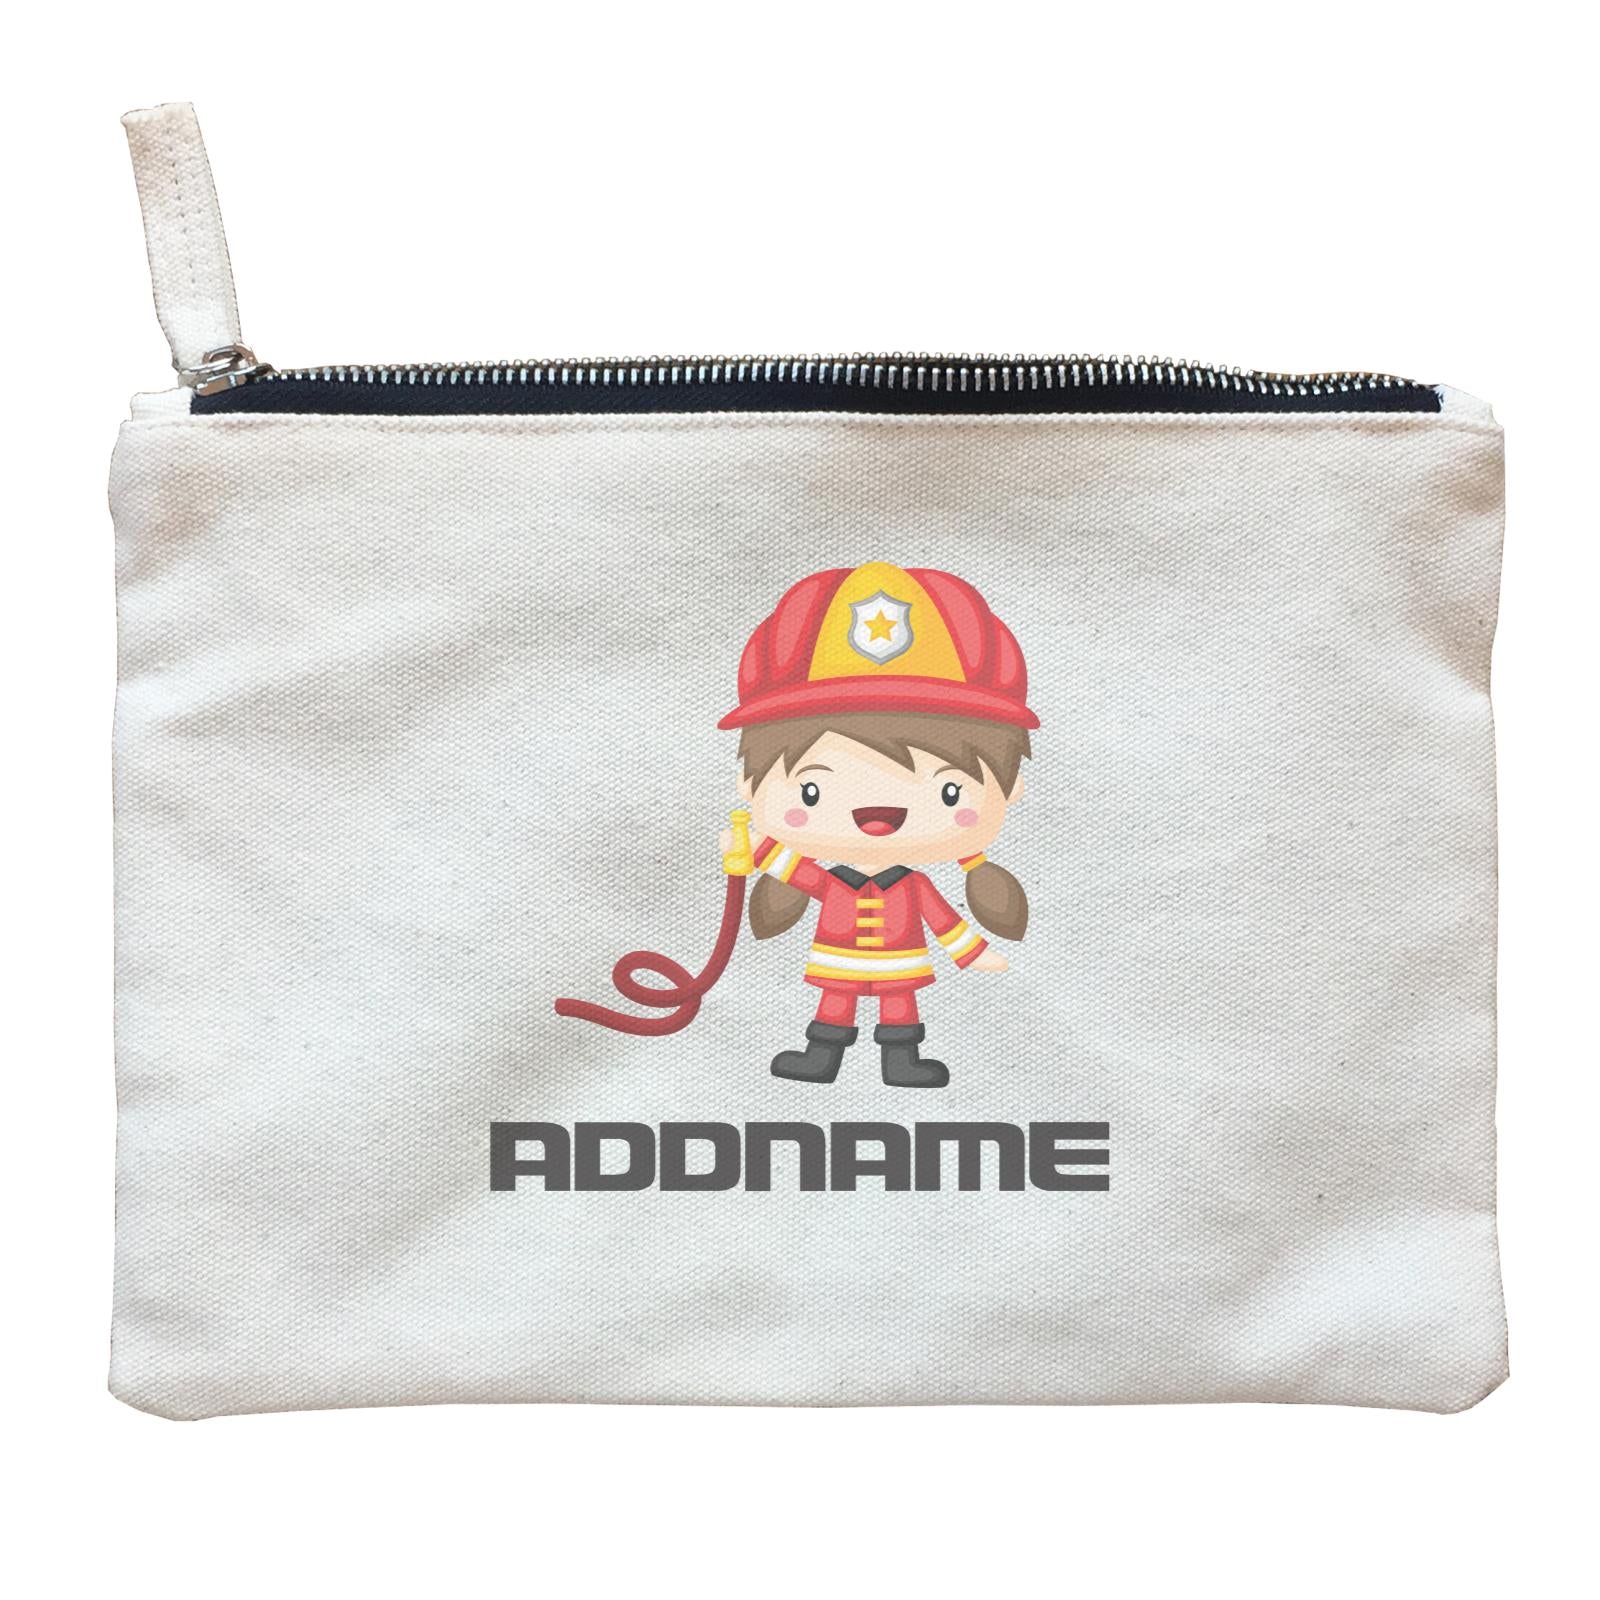 Birthday Firefighter Girl Holding Water Hose Addname Zipper Pouch